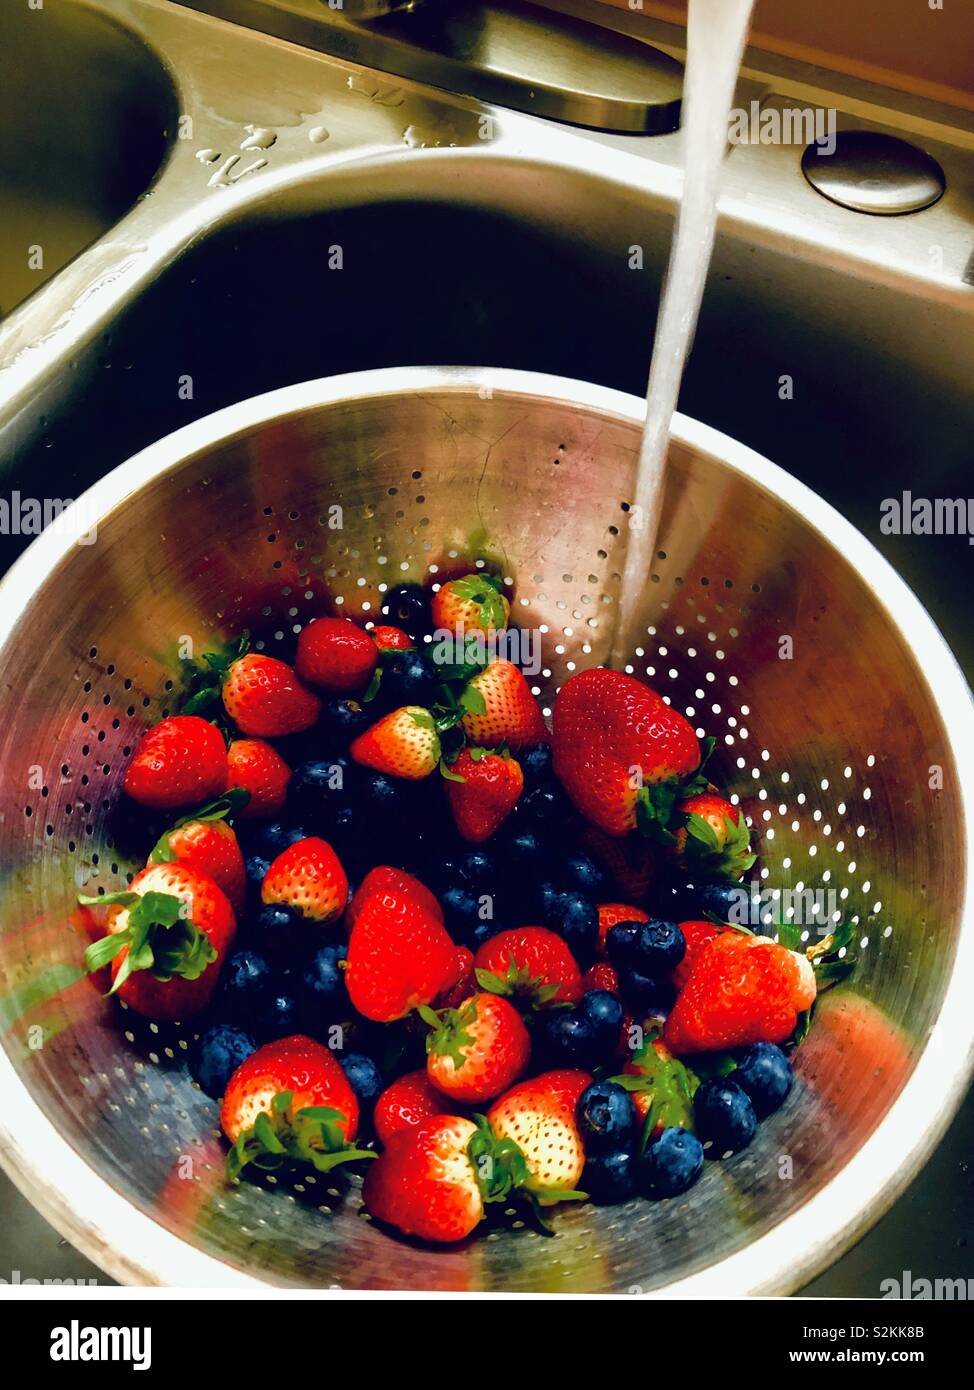 Berries in a colander Stock Photo